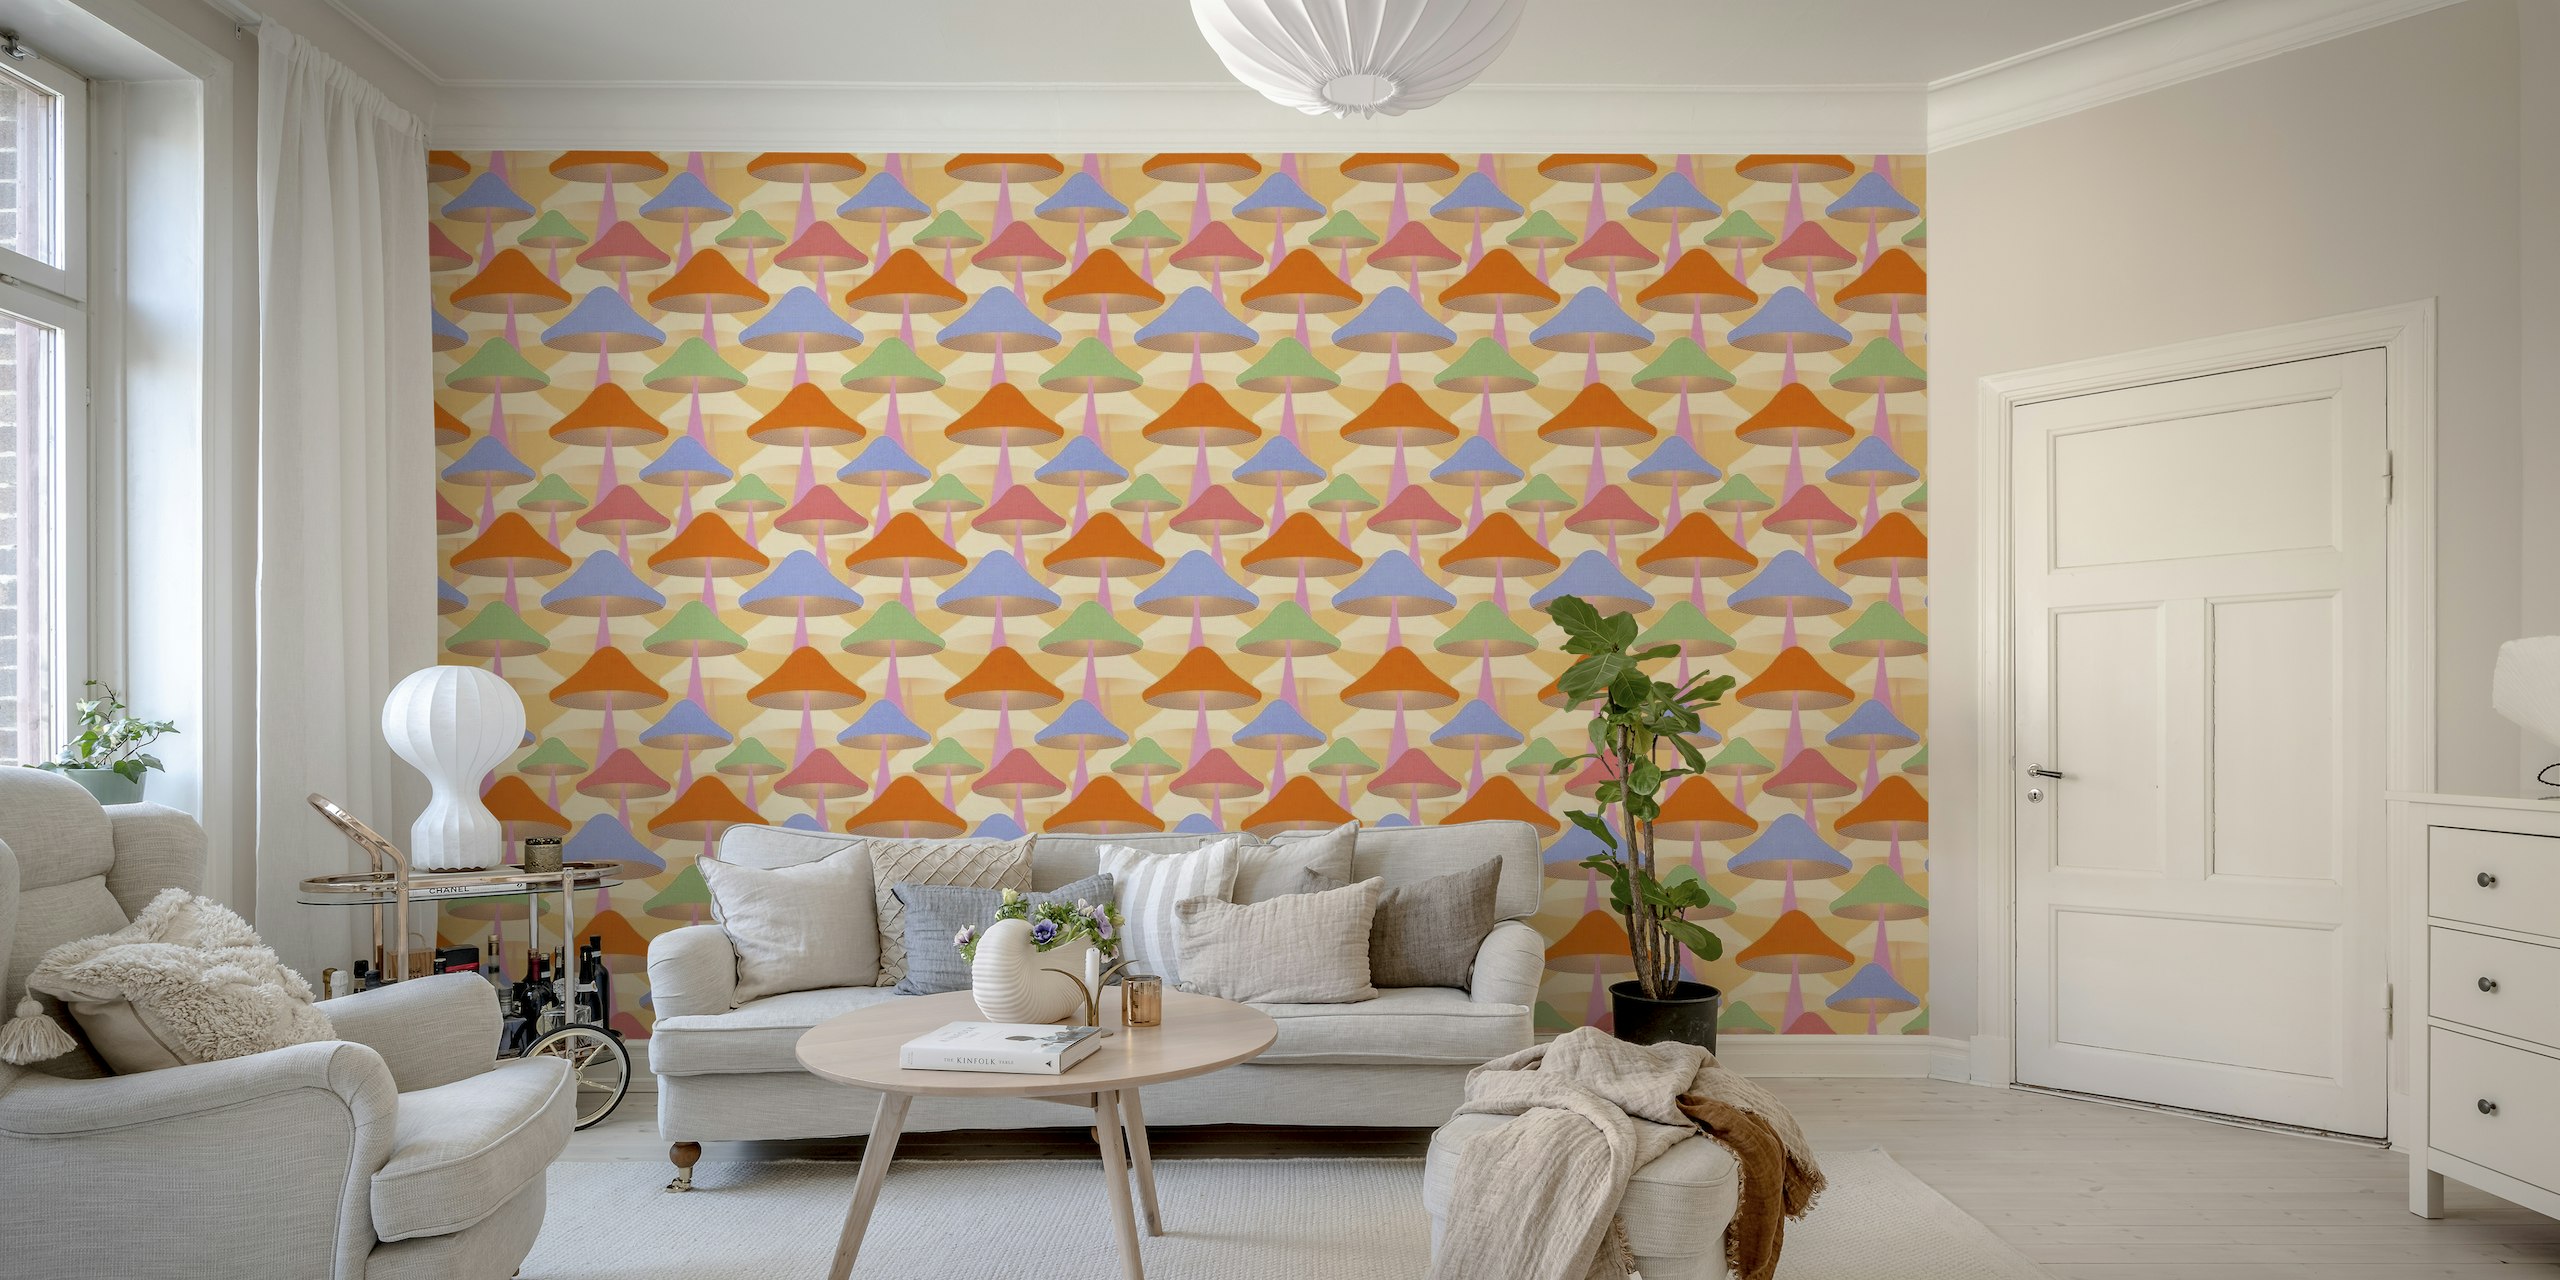 Abstract retro-styled mushrooms wall mural in peach, orange, and green shades on a cream background.